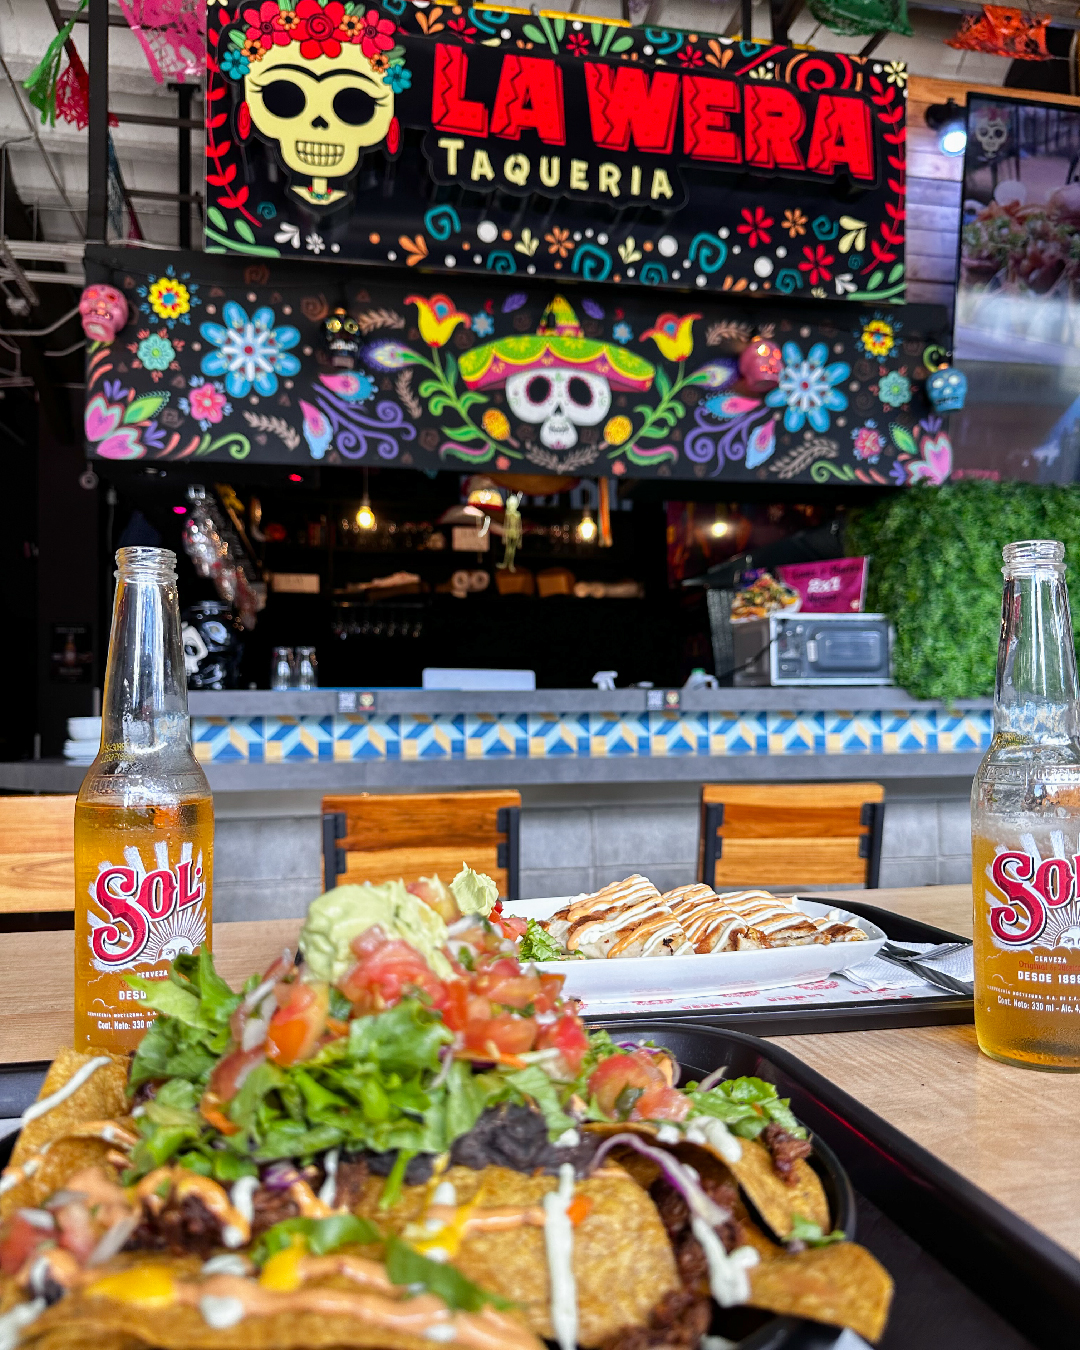 Amor de Barrio invites tourists to explore a vibrant culinary marketplace and bar food, right in the heart of San José.